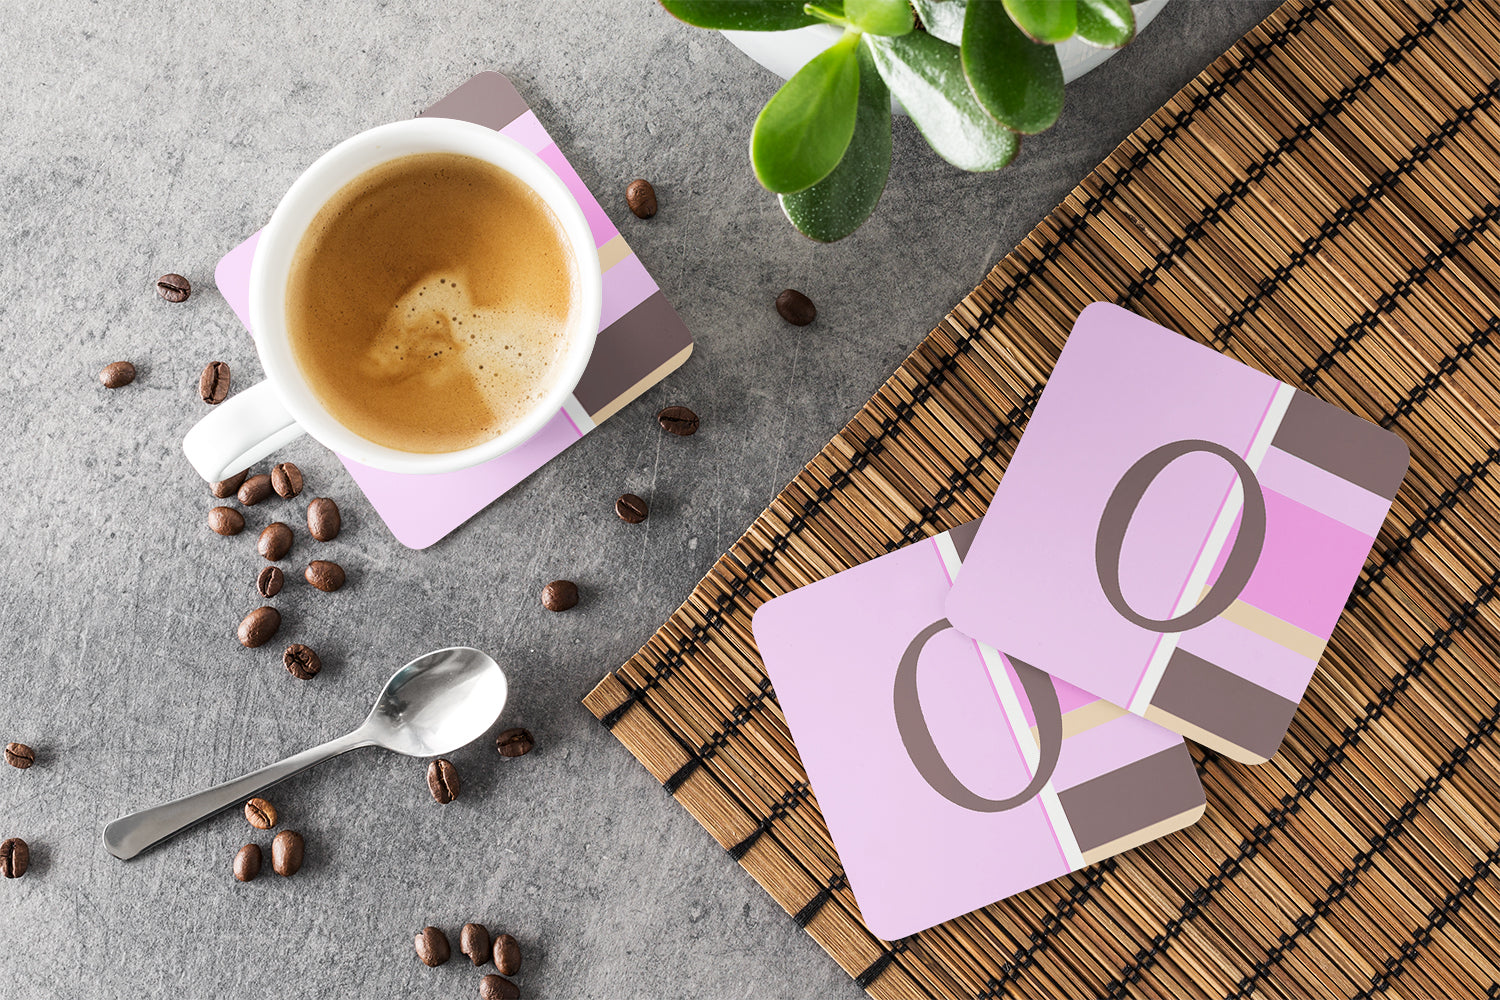 Set of 4 Monogram - Pink Stripes Foam Coasters Initial Letter O - the-store.com